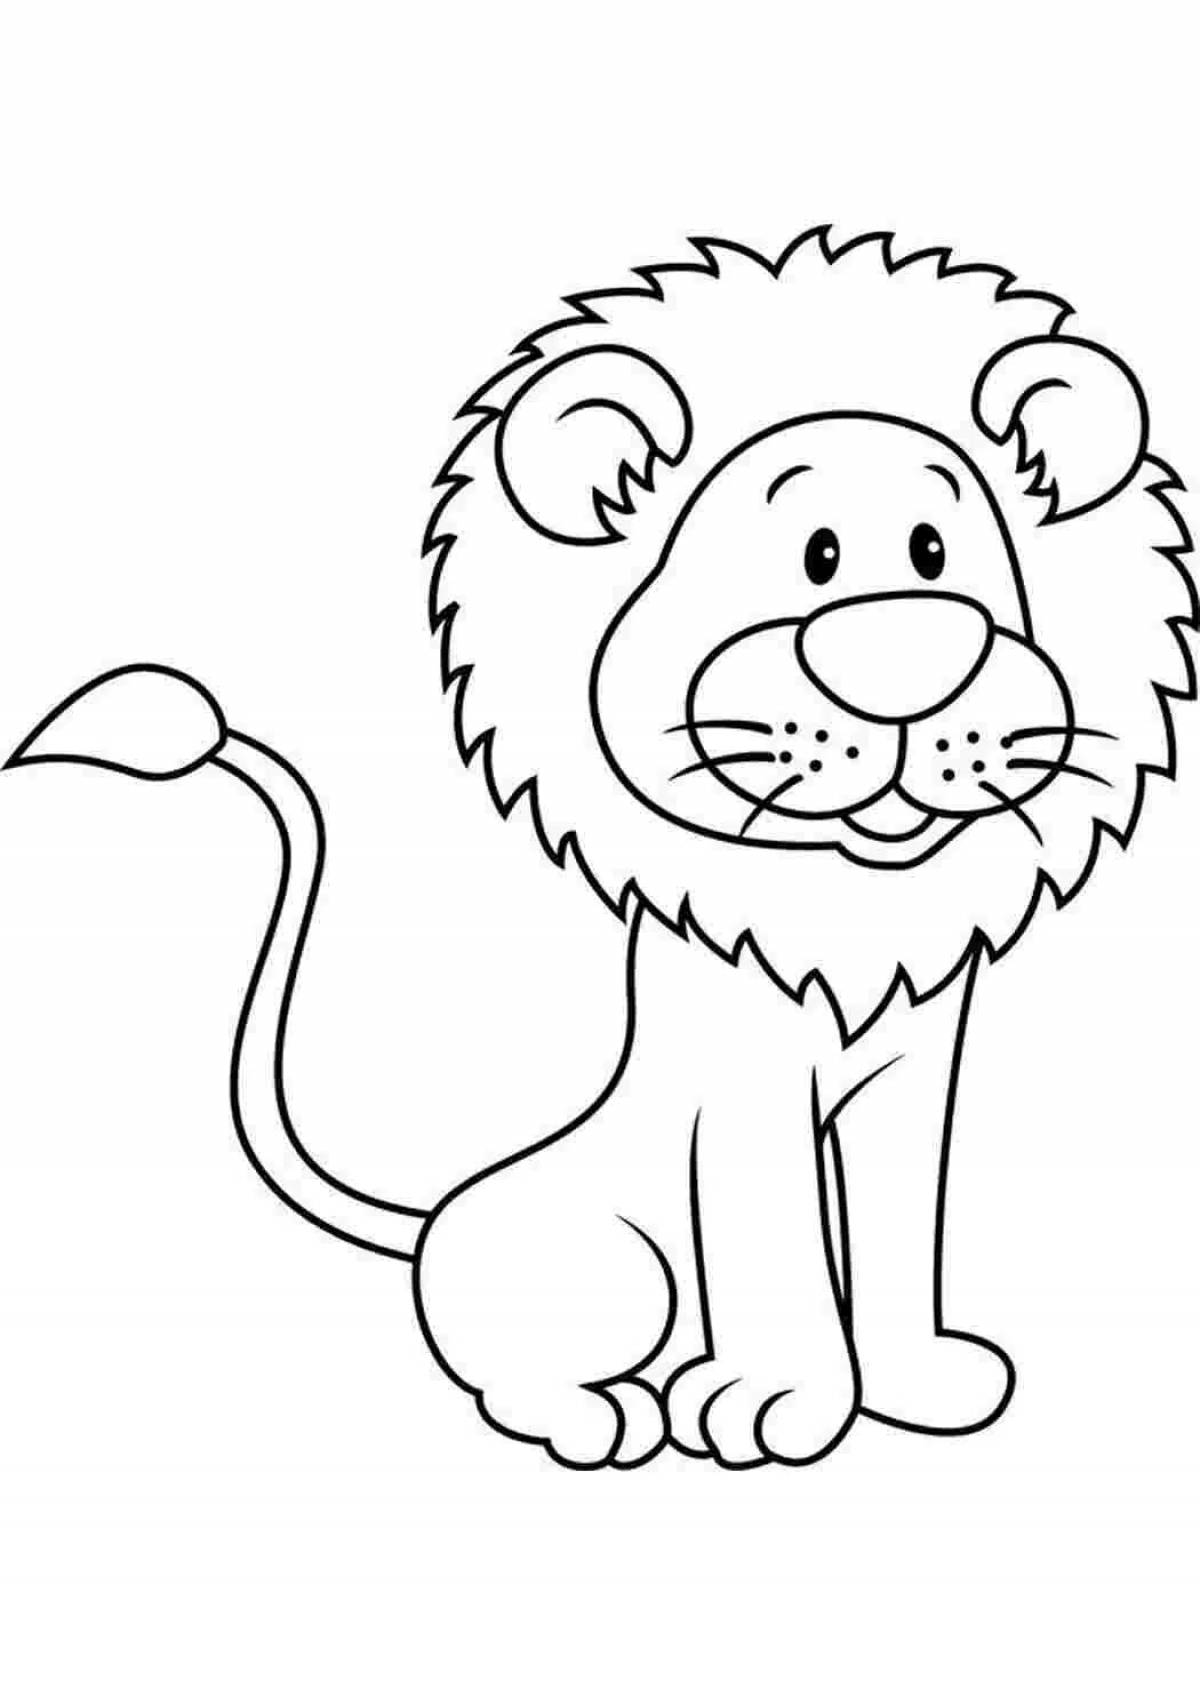 Playful lion coloring pages for kids